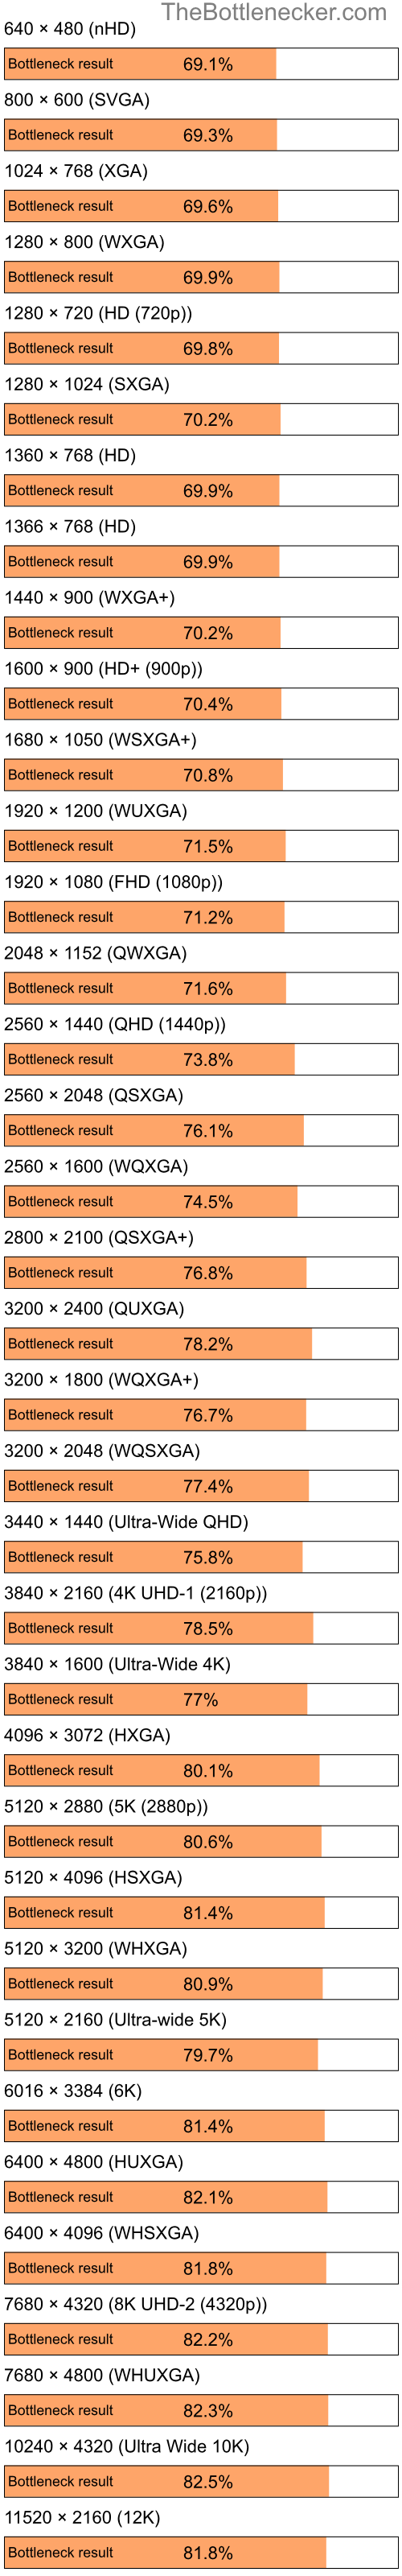 Bottleneck results by resolution for Intel Pentium 4 and AMD Radeon HD 6290 in Graphic Card Intense Tasks